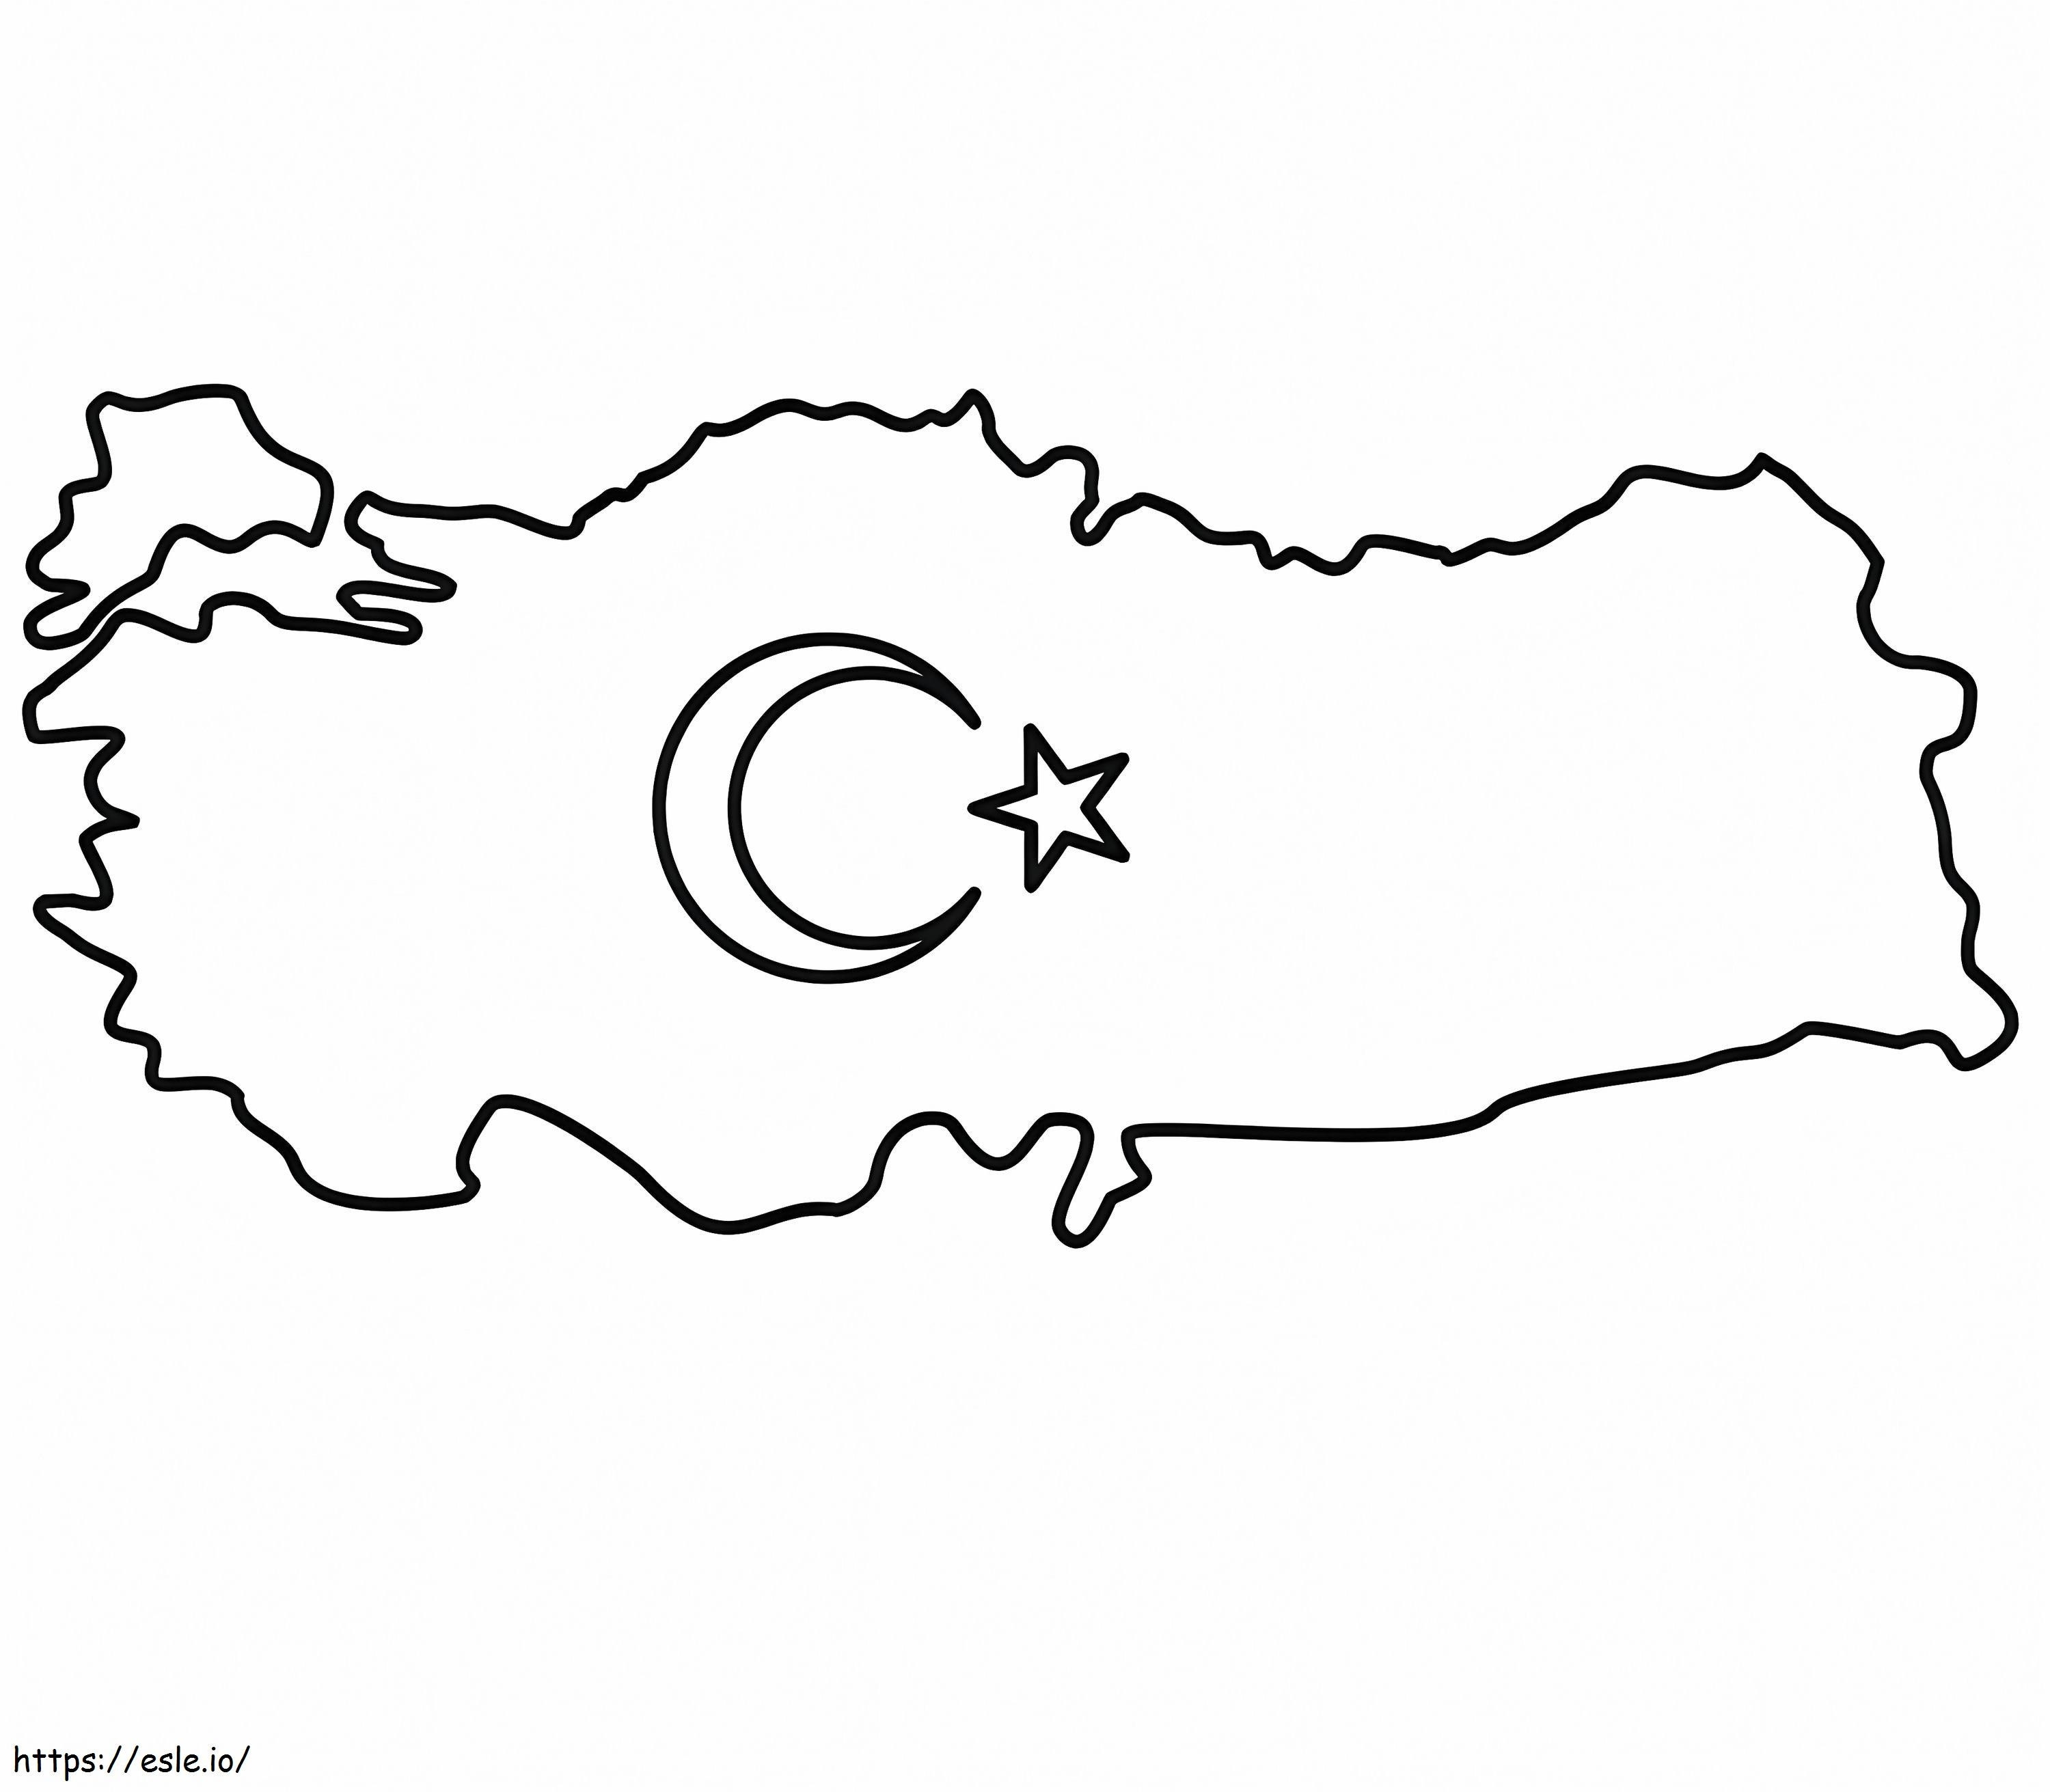 Turkey Map coloring page